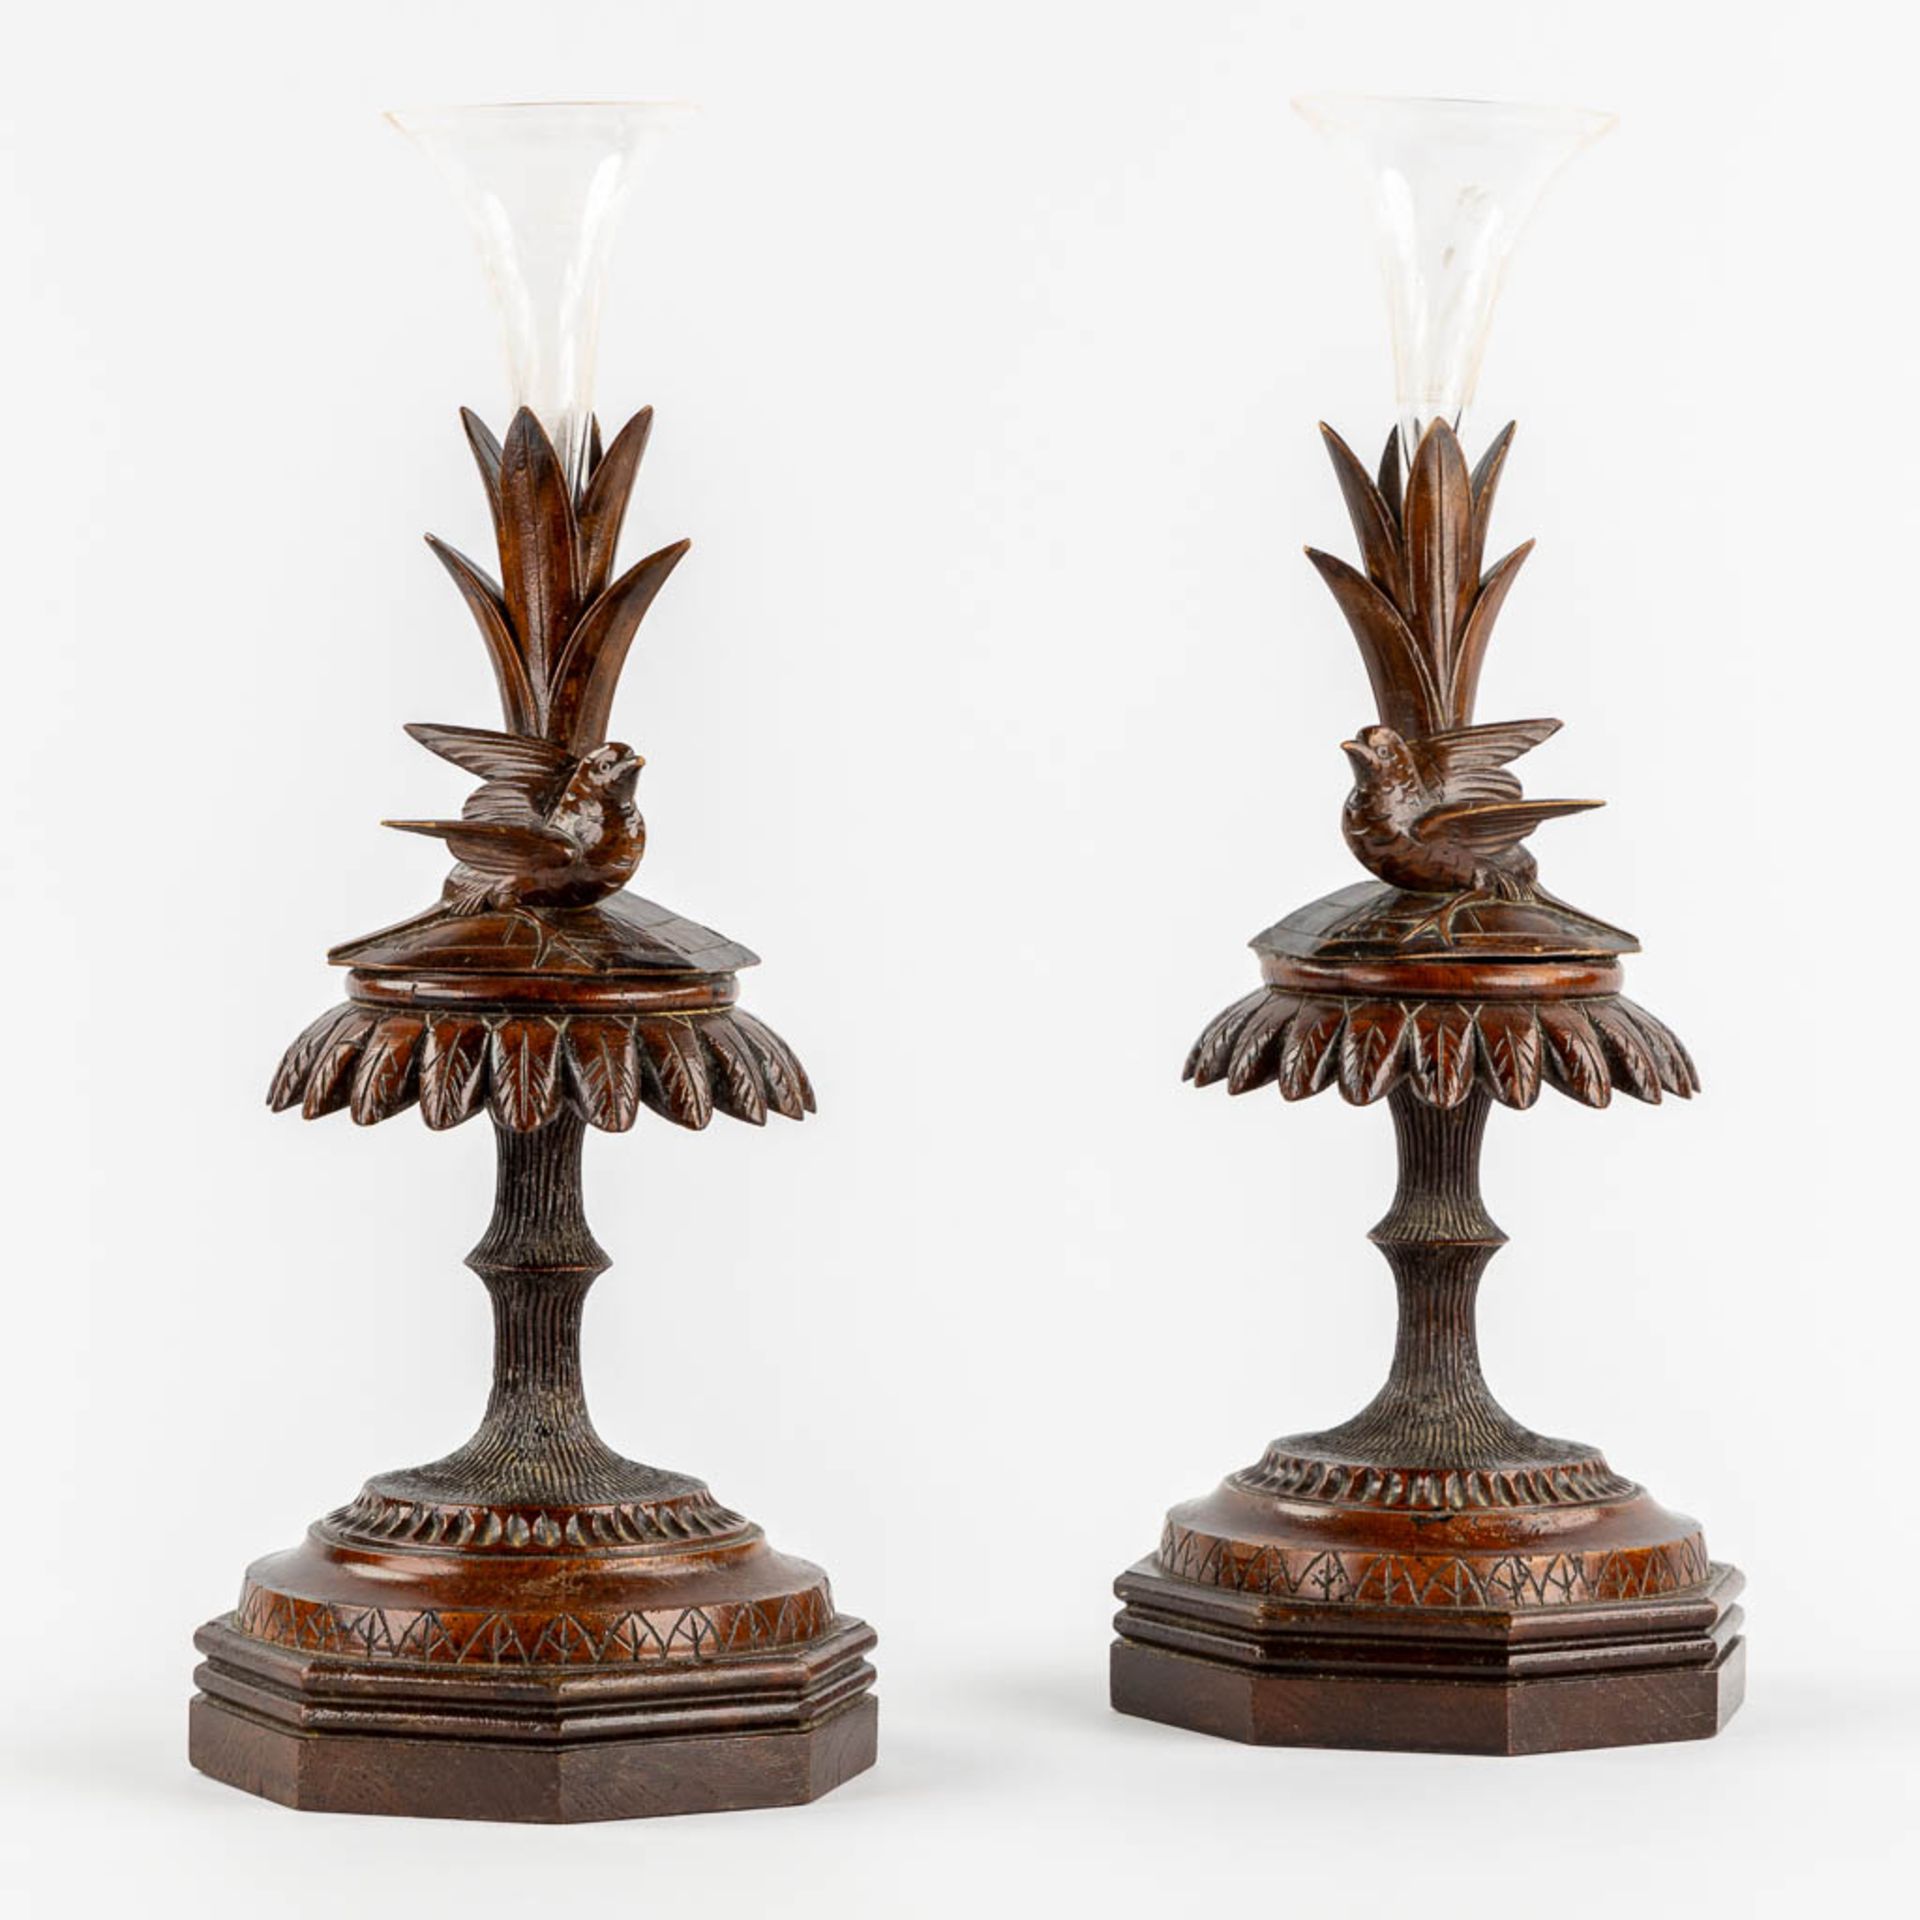 Two bases for Trumpet Vases, Schwartzwald or Black Forest. Circa 1880. (L:14,5 x W:14,5 x H:40 cm)